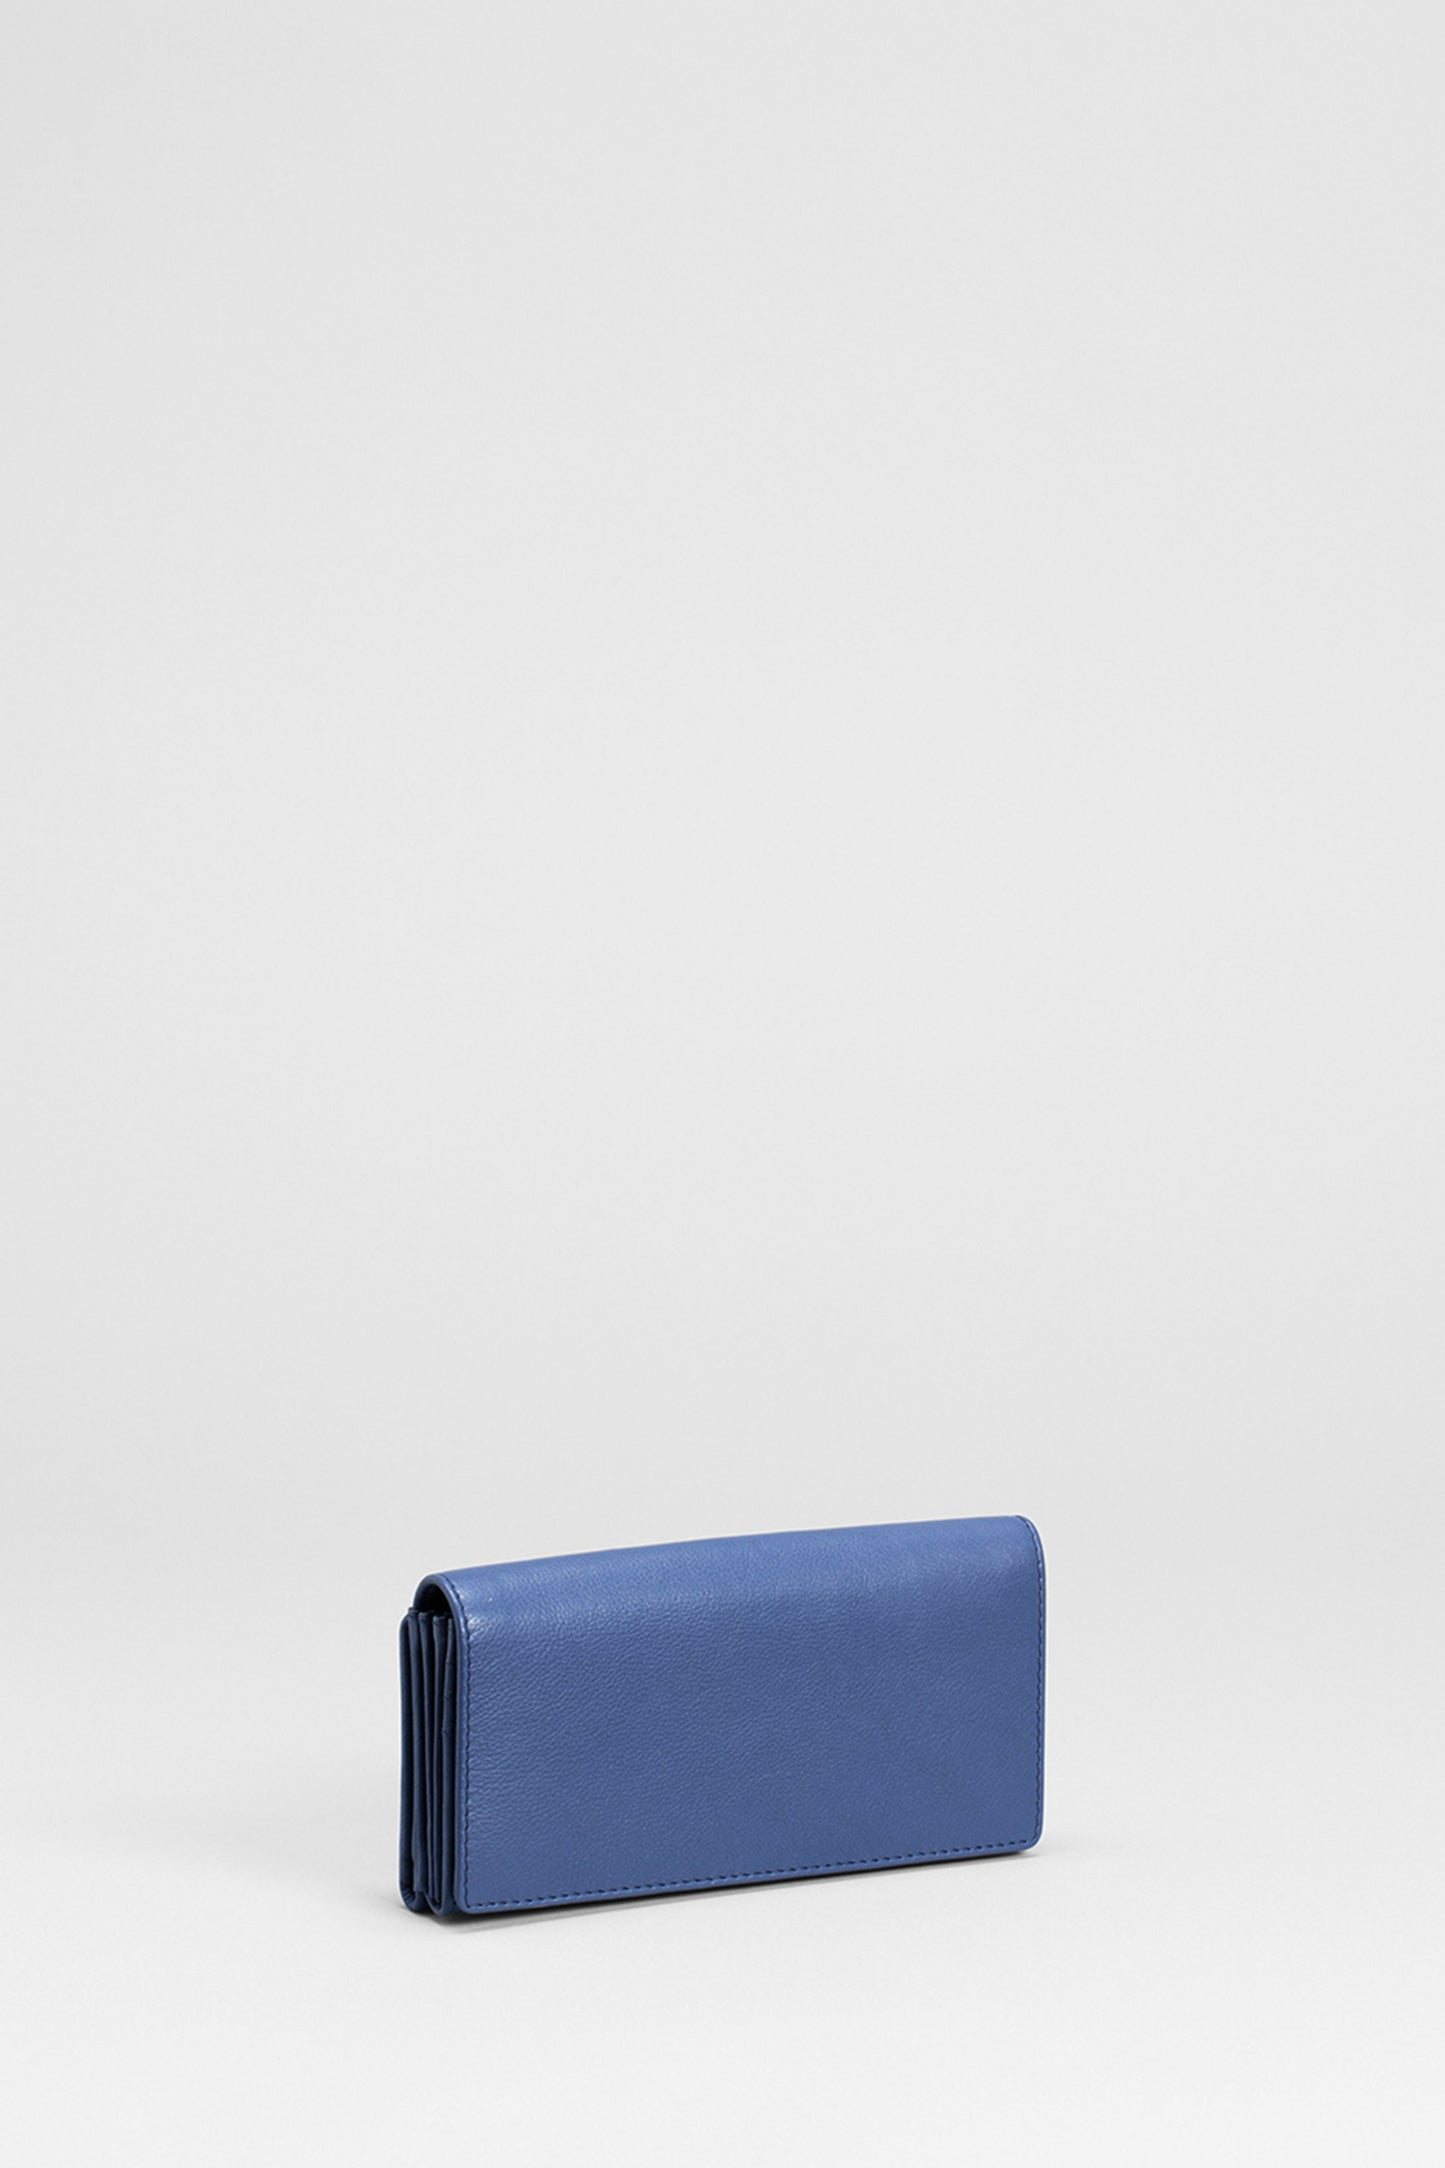 Leone Colourful Leather Wallet Front Angled STEEL